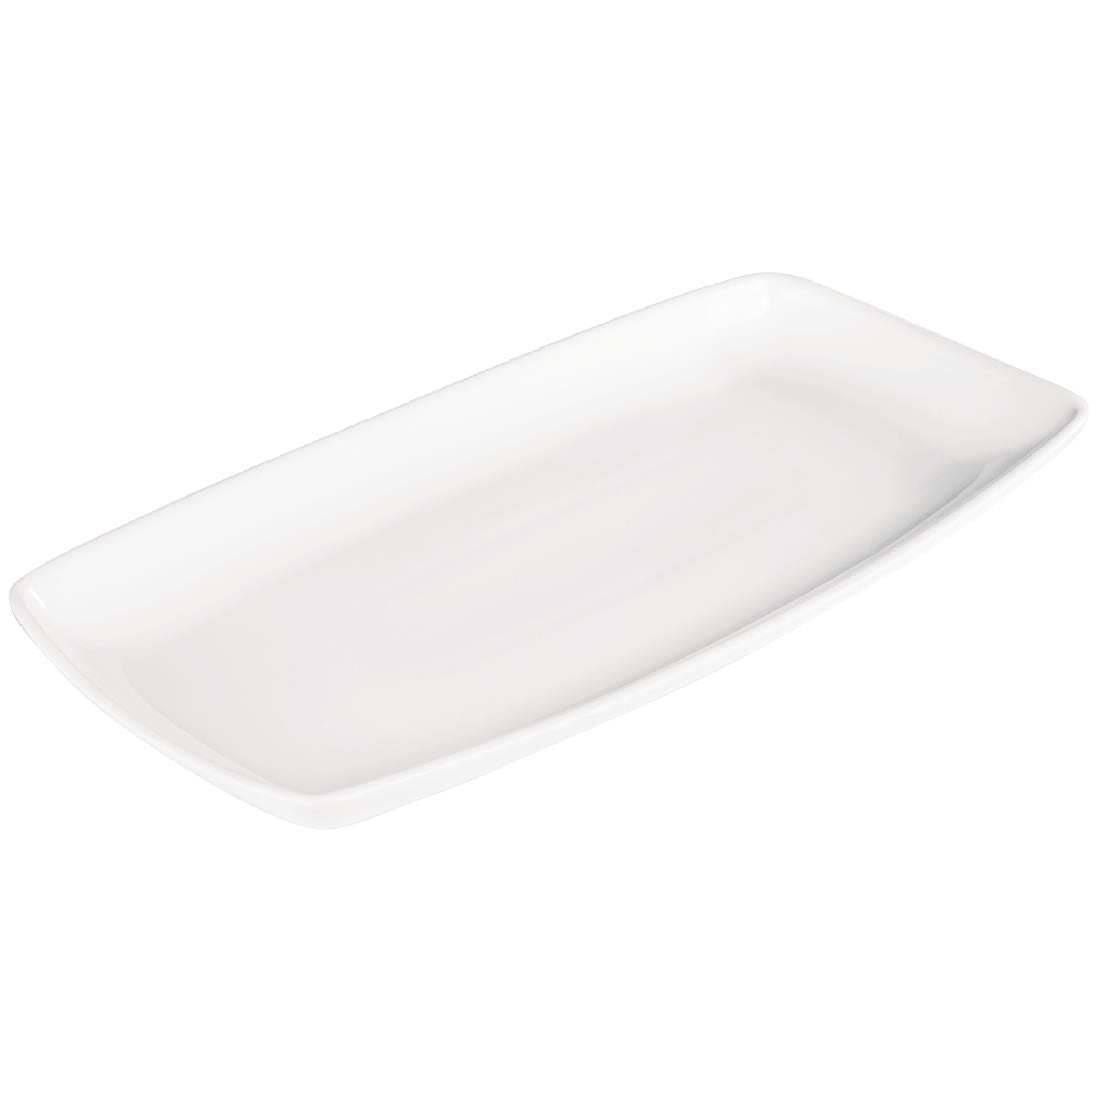 DP230 Churchill X Squared Oblong Plates 350x 185mm (Pack of 6) JD Catering Equipment Solutions Ltd